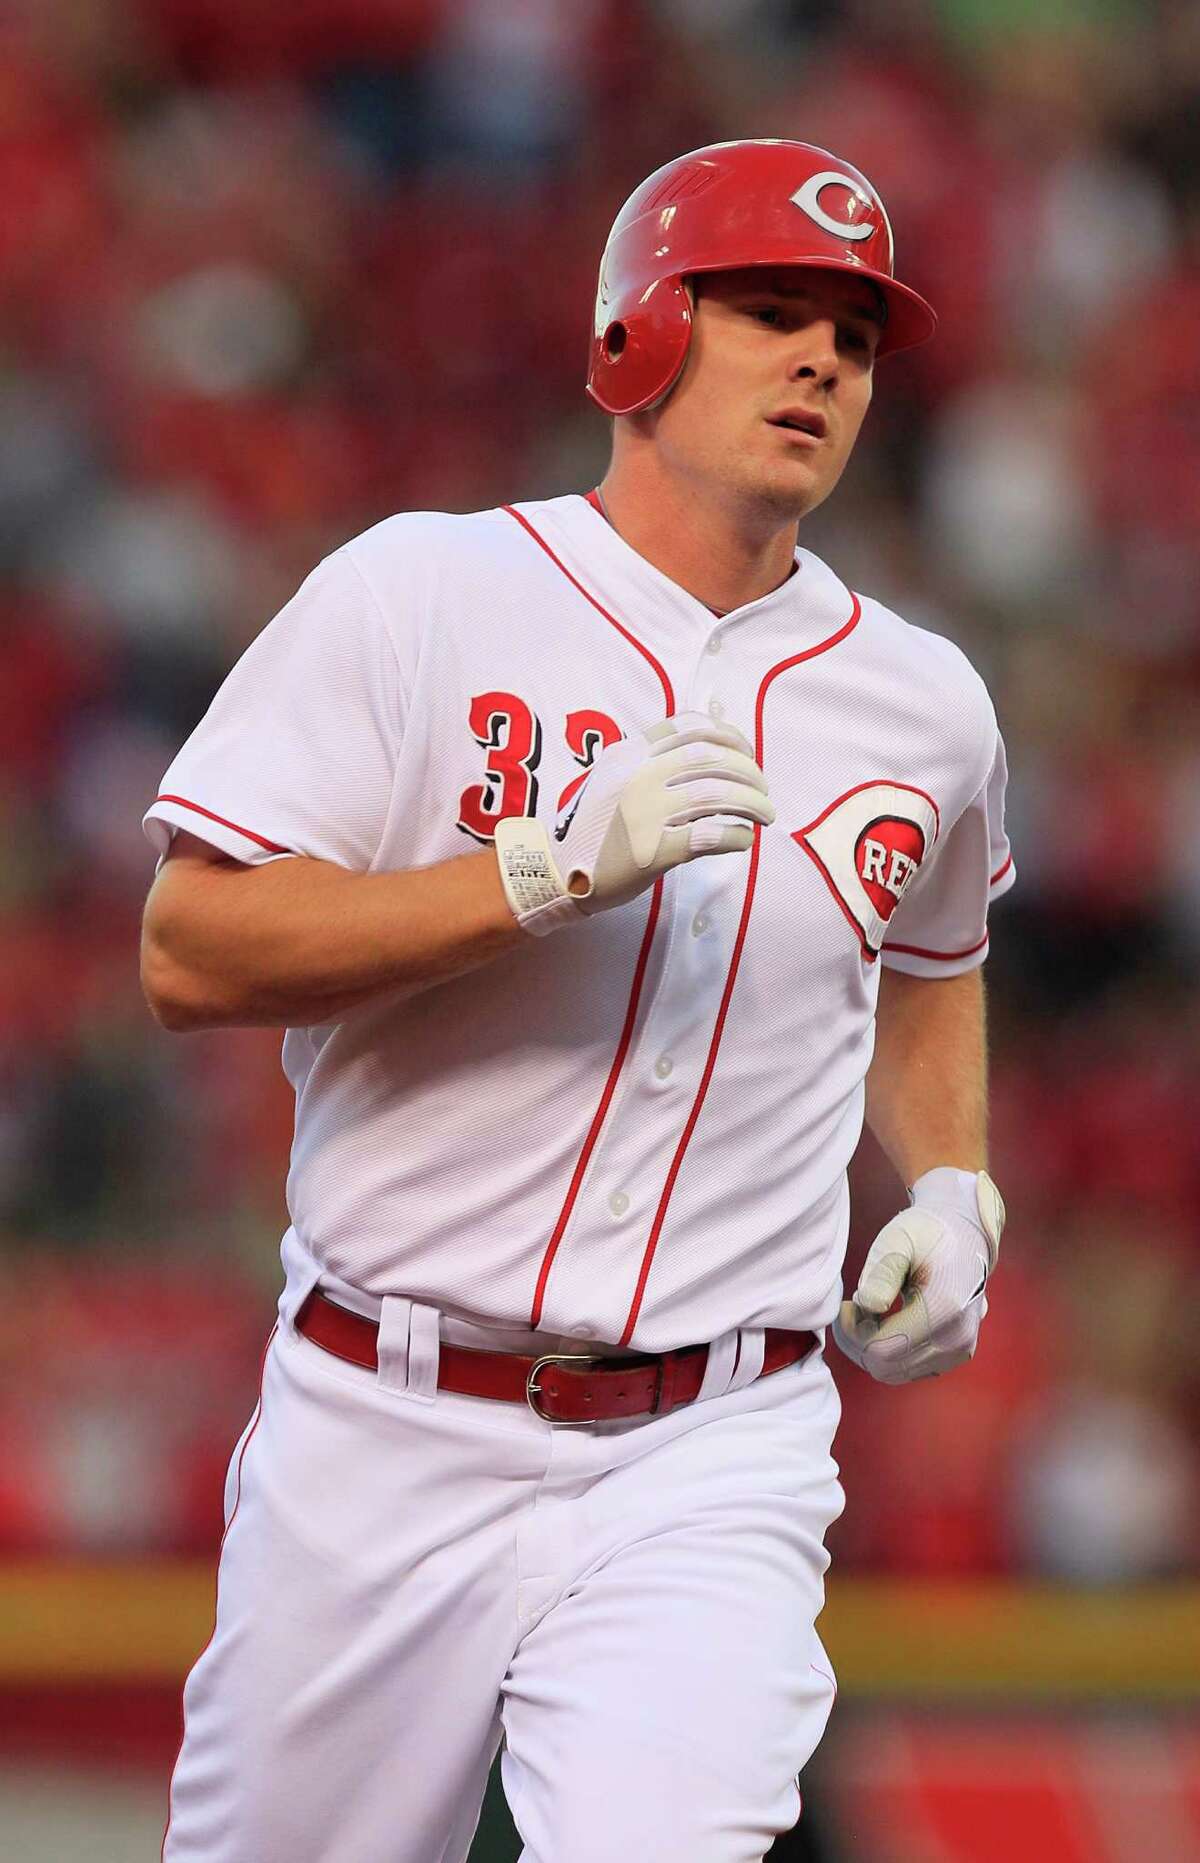 Cincinnati Reds' Jay Bruce rounds the bases after hitting a solo home run against the Milwaukee Brewers in a baseball game, Tuesday, June 26, 2012 in Cincinnati. (AP Photo/Al Behrman)